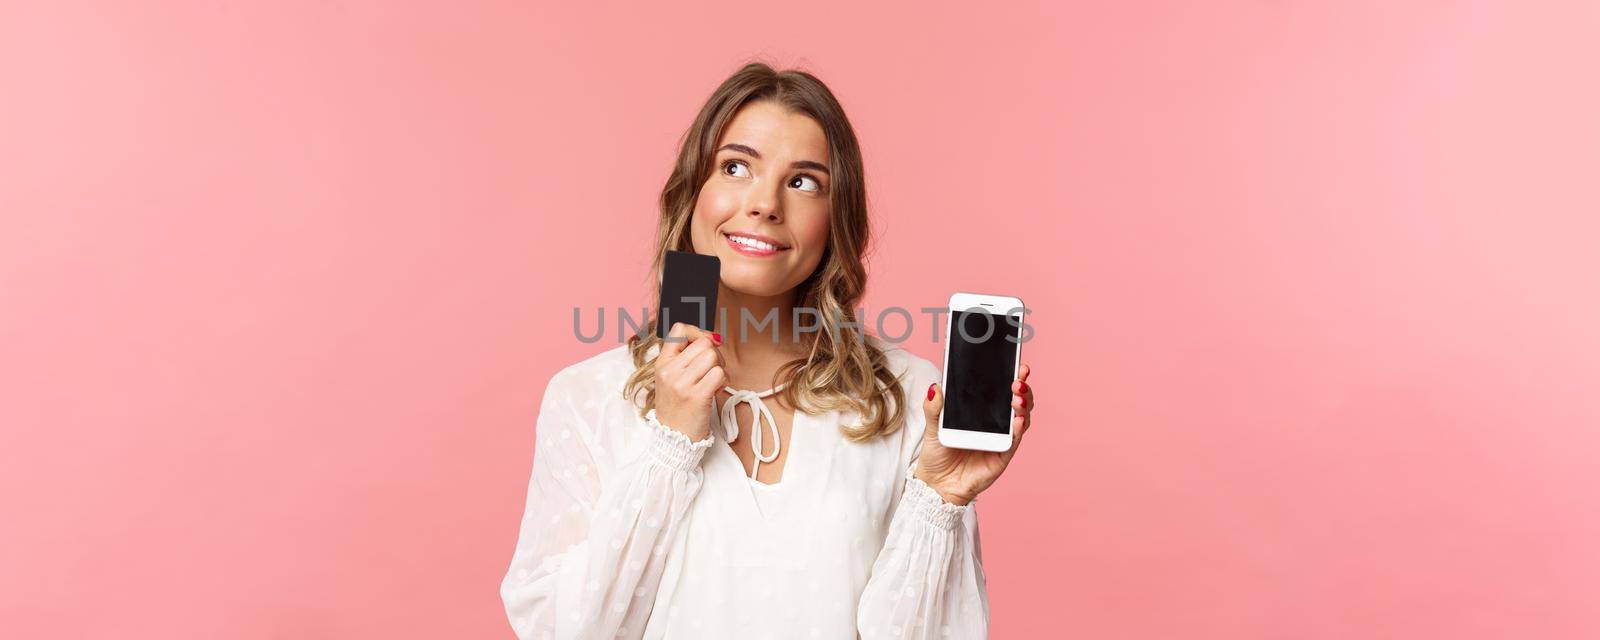 Finance, shopping and technology concept. Close-up portrait of thoughtful, dreamy attractive blond girl in white dress, thinking what buy, order something online shop, hold smartphone and credit card.